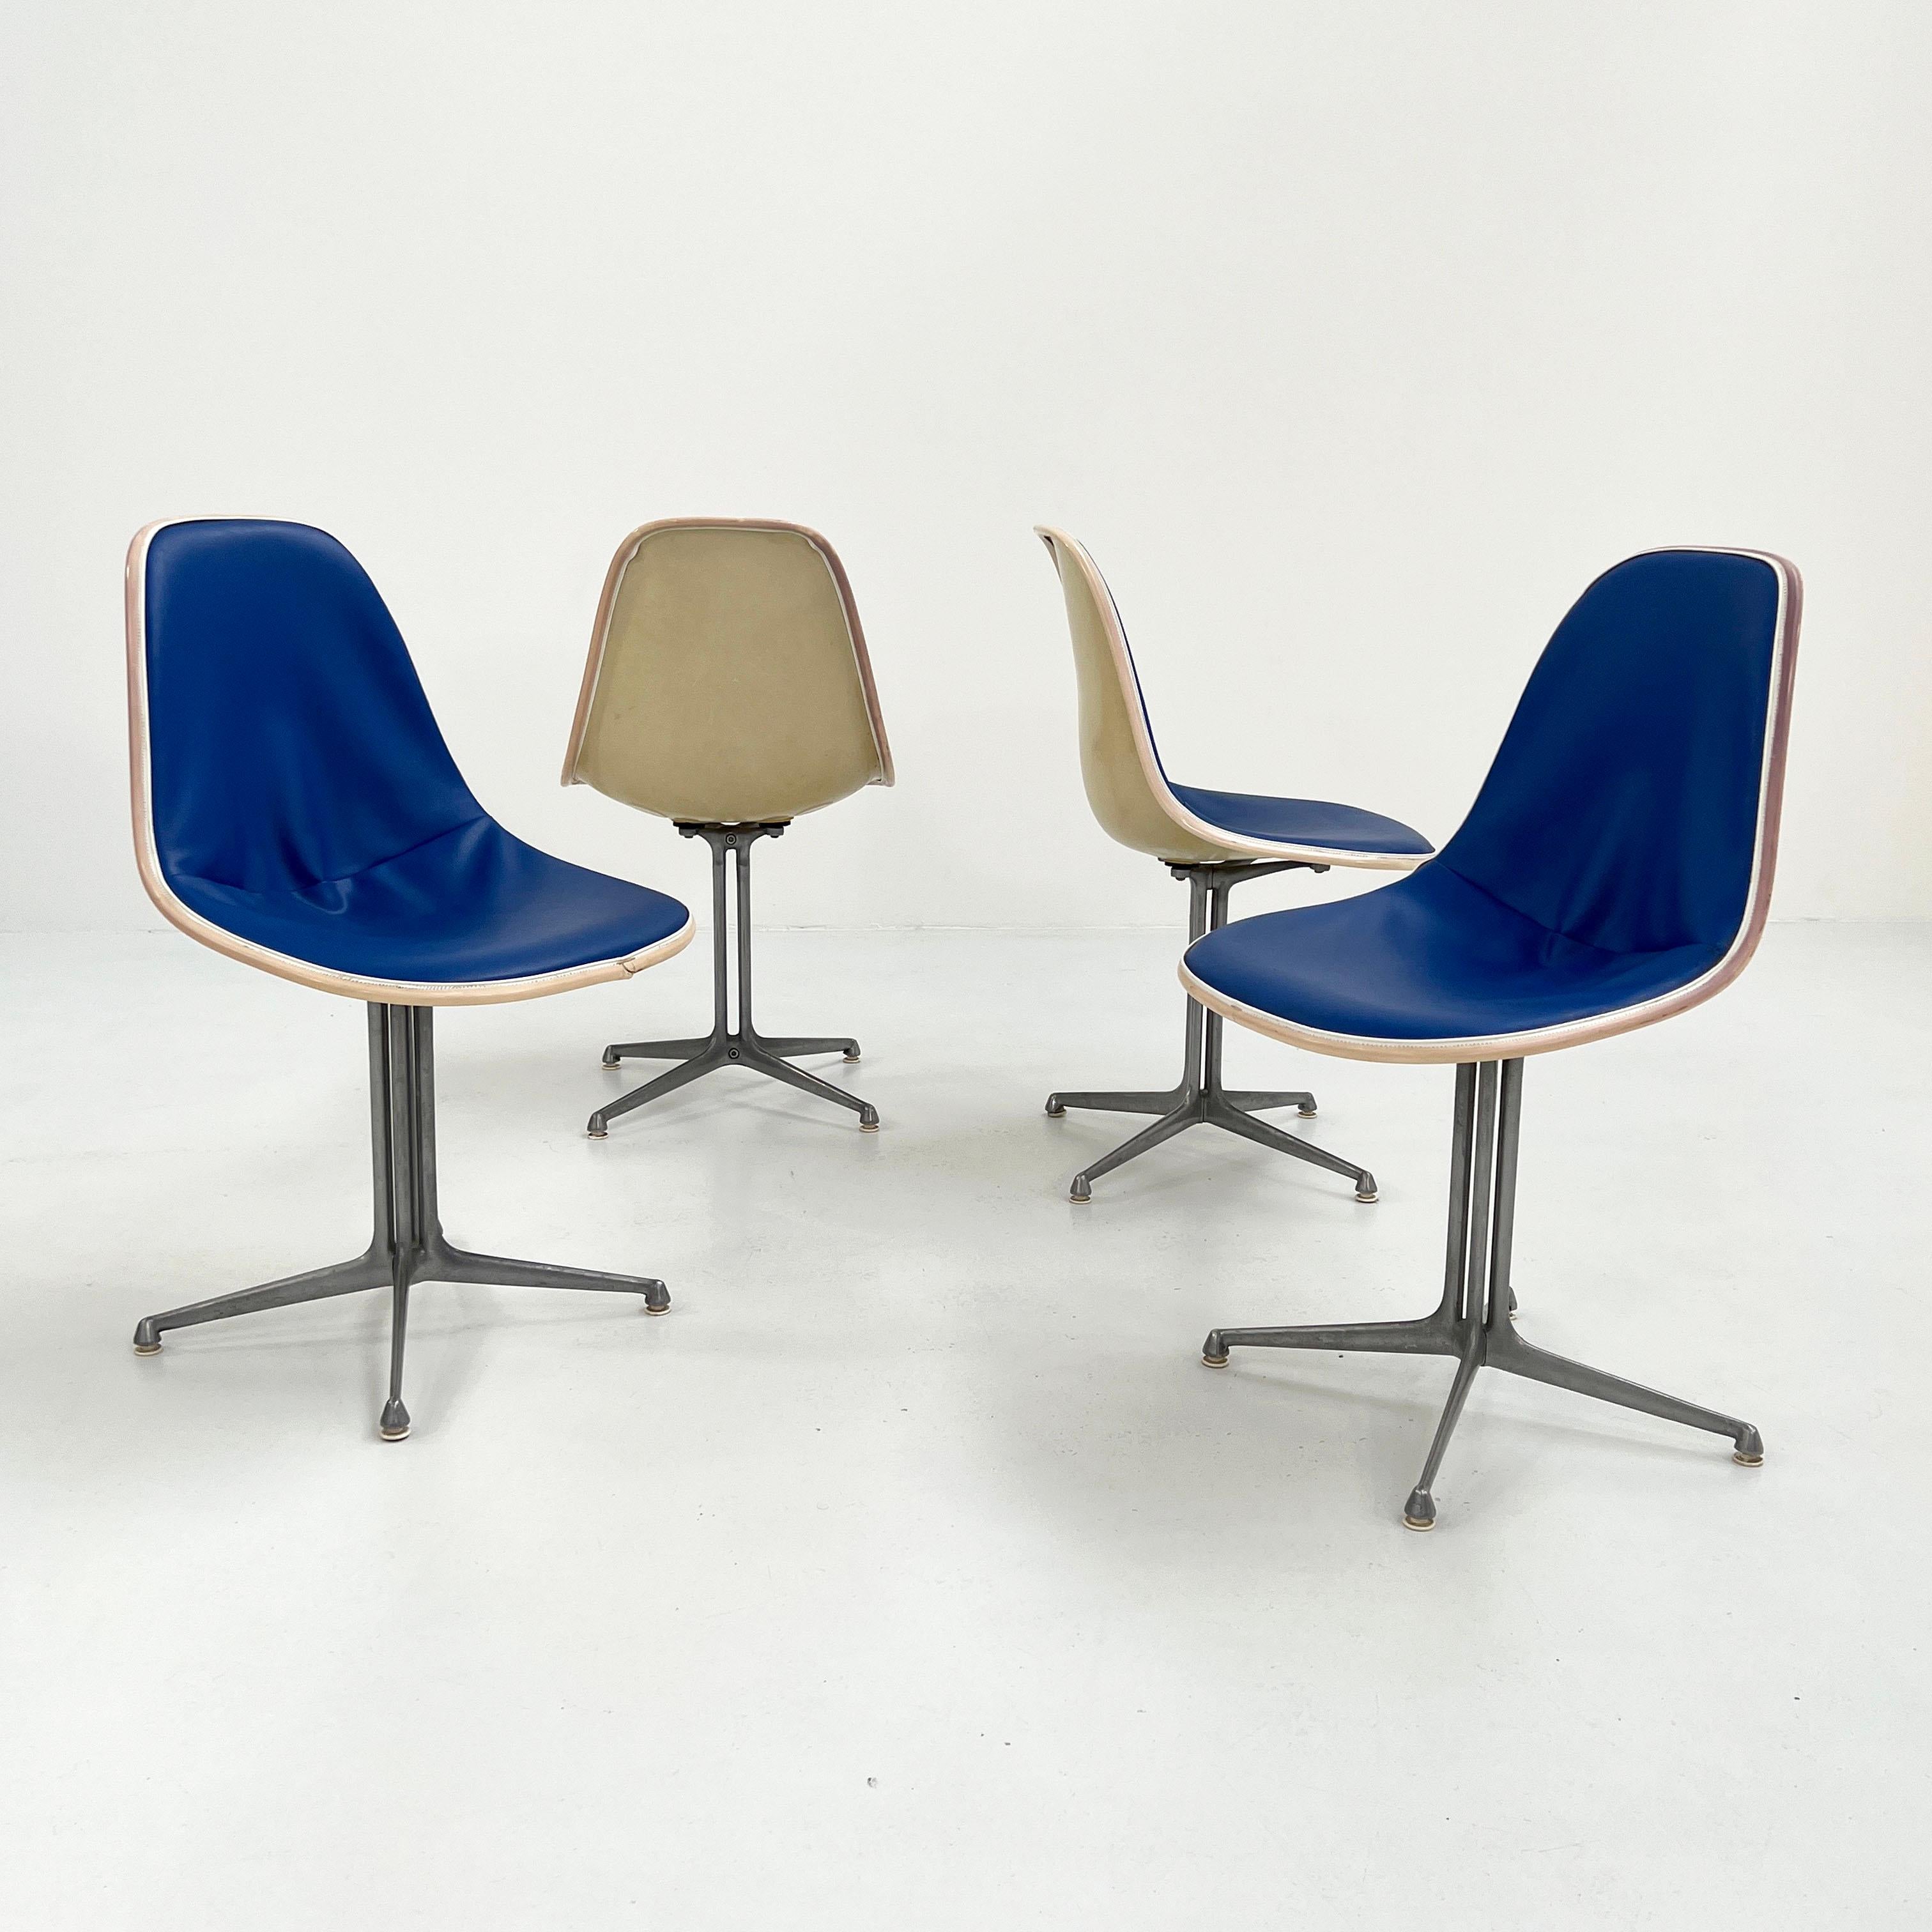 Set of 4 La Fonda dining chairs by Charles & Ray Eames for Herman Miller, 1960s
Designer - Charles and Ray Eames
Producer - Herman Miller
Model - La Fonda Dining Chairs
Design Period - Sixties
Measurements - Width 47 cm x Depth 46 cm x Height